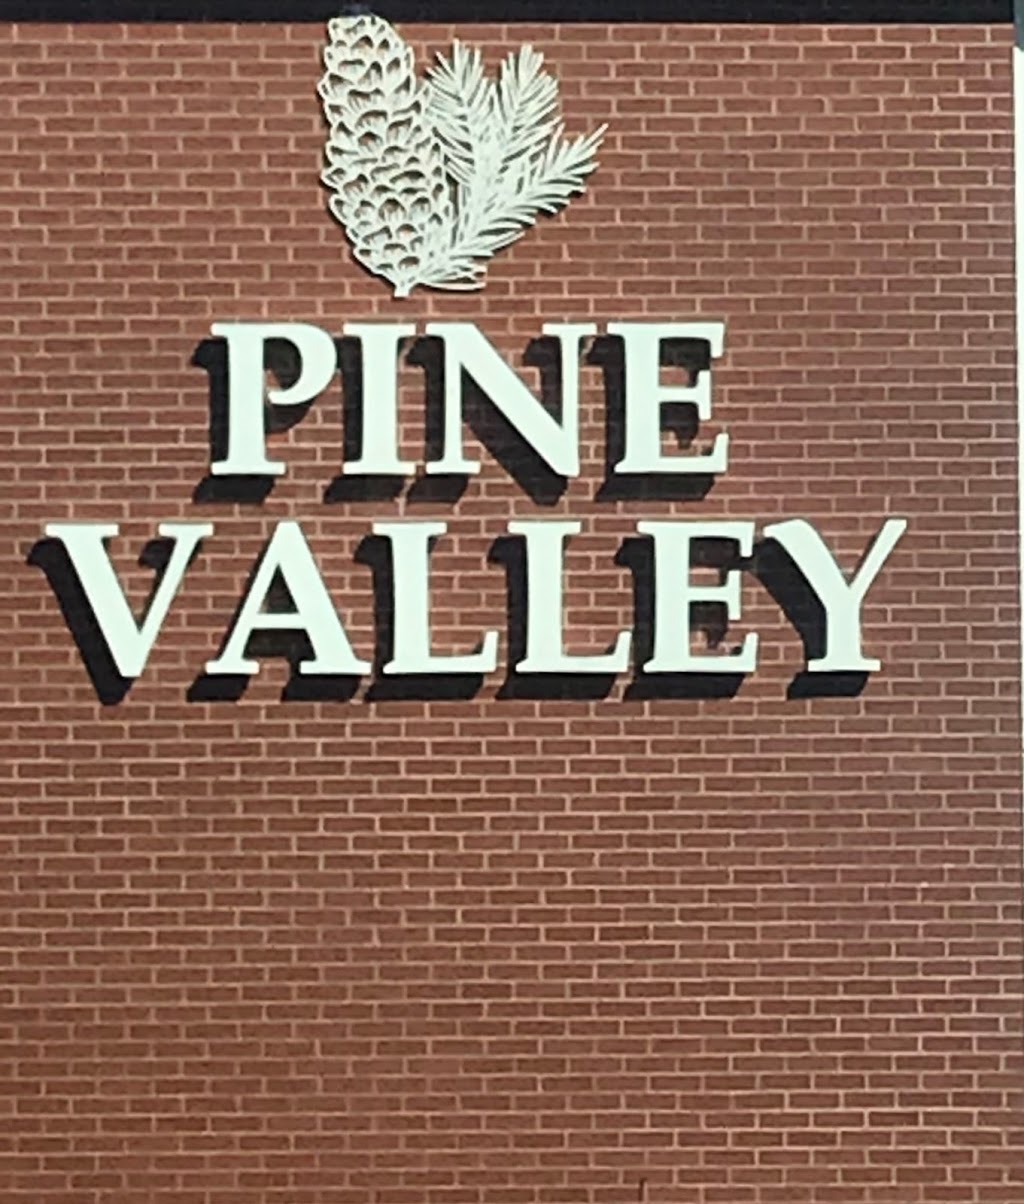 Pine Valley Assisted Living | 620 Woodland Meadows Dr, Arnold, MO 63010 | Phone: (636) 202-1050